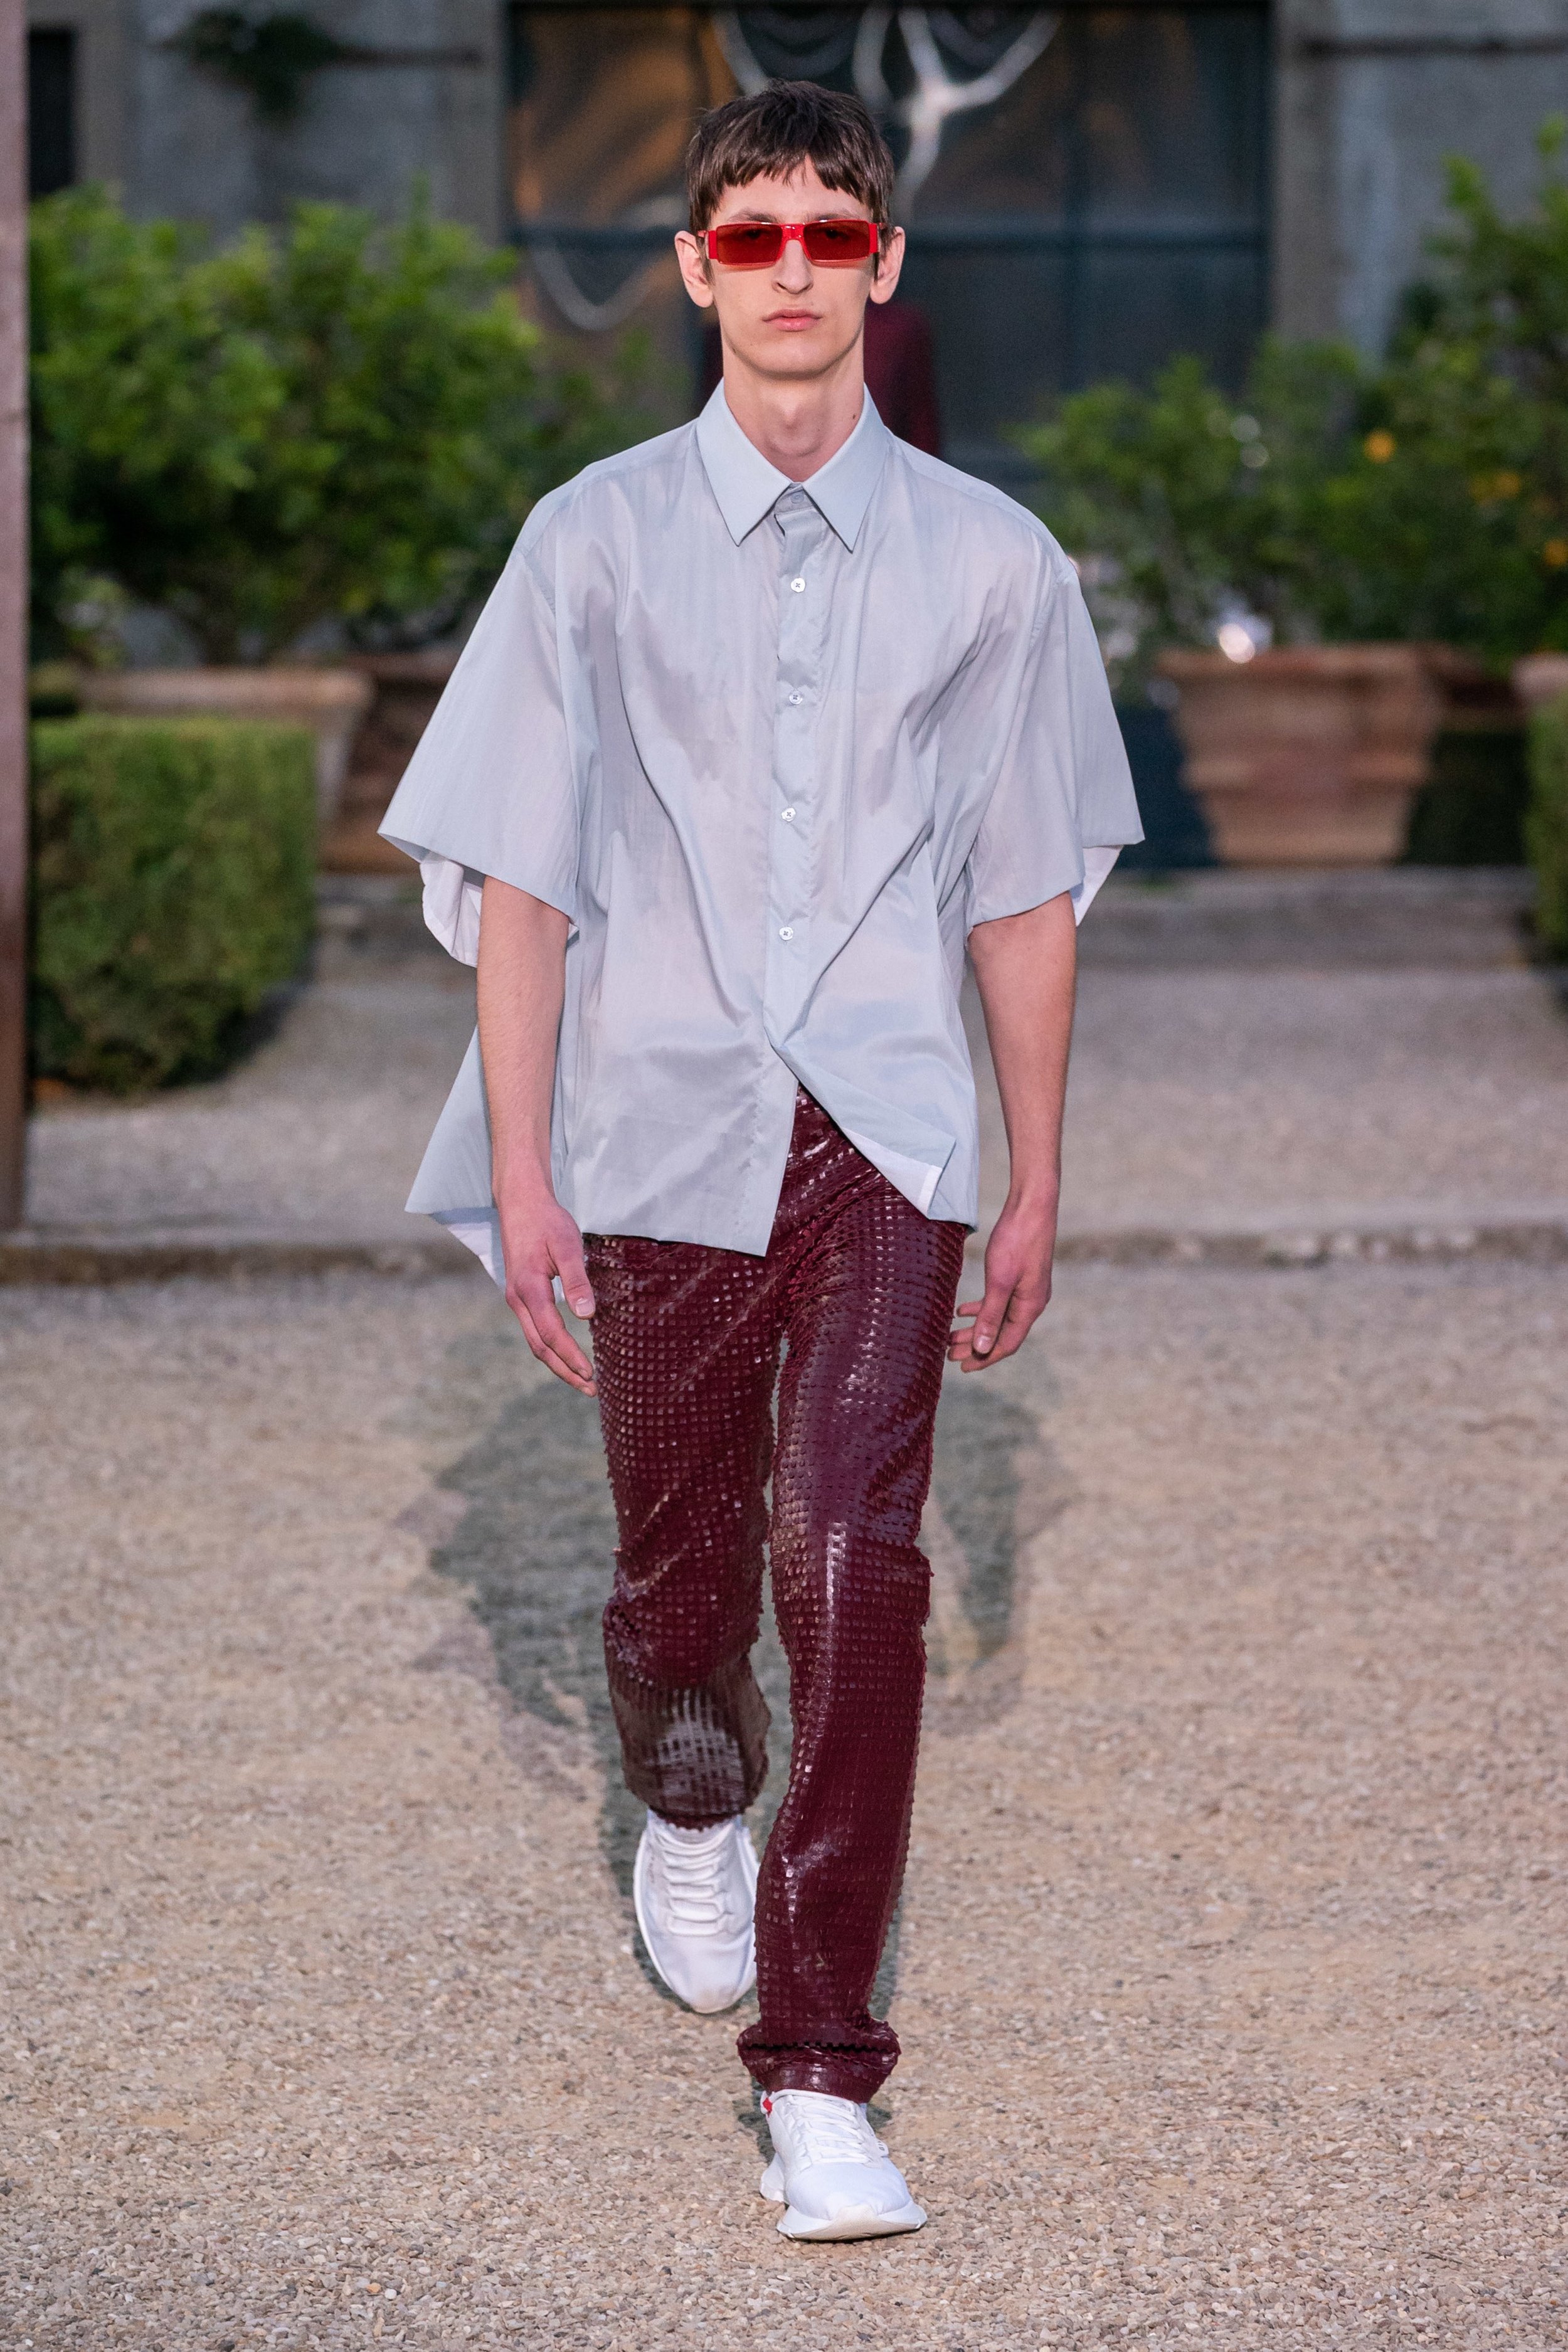 Behind_The_Blinds_Magazine_Givenchy_Men_SS20_Pitti_ALE0399.jpg